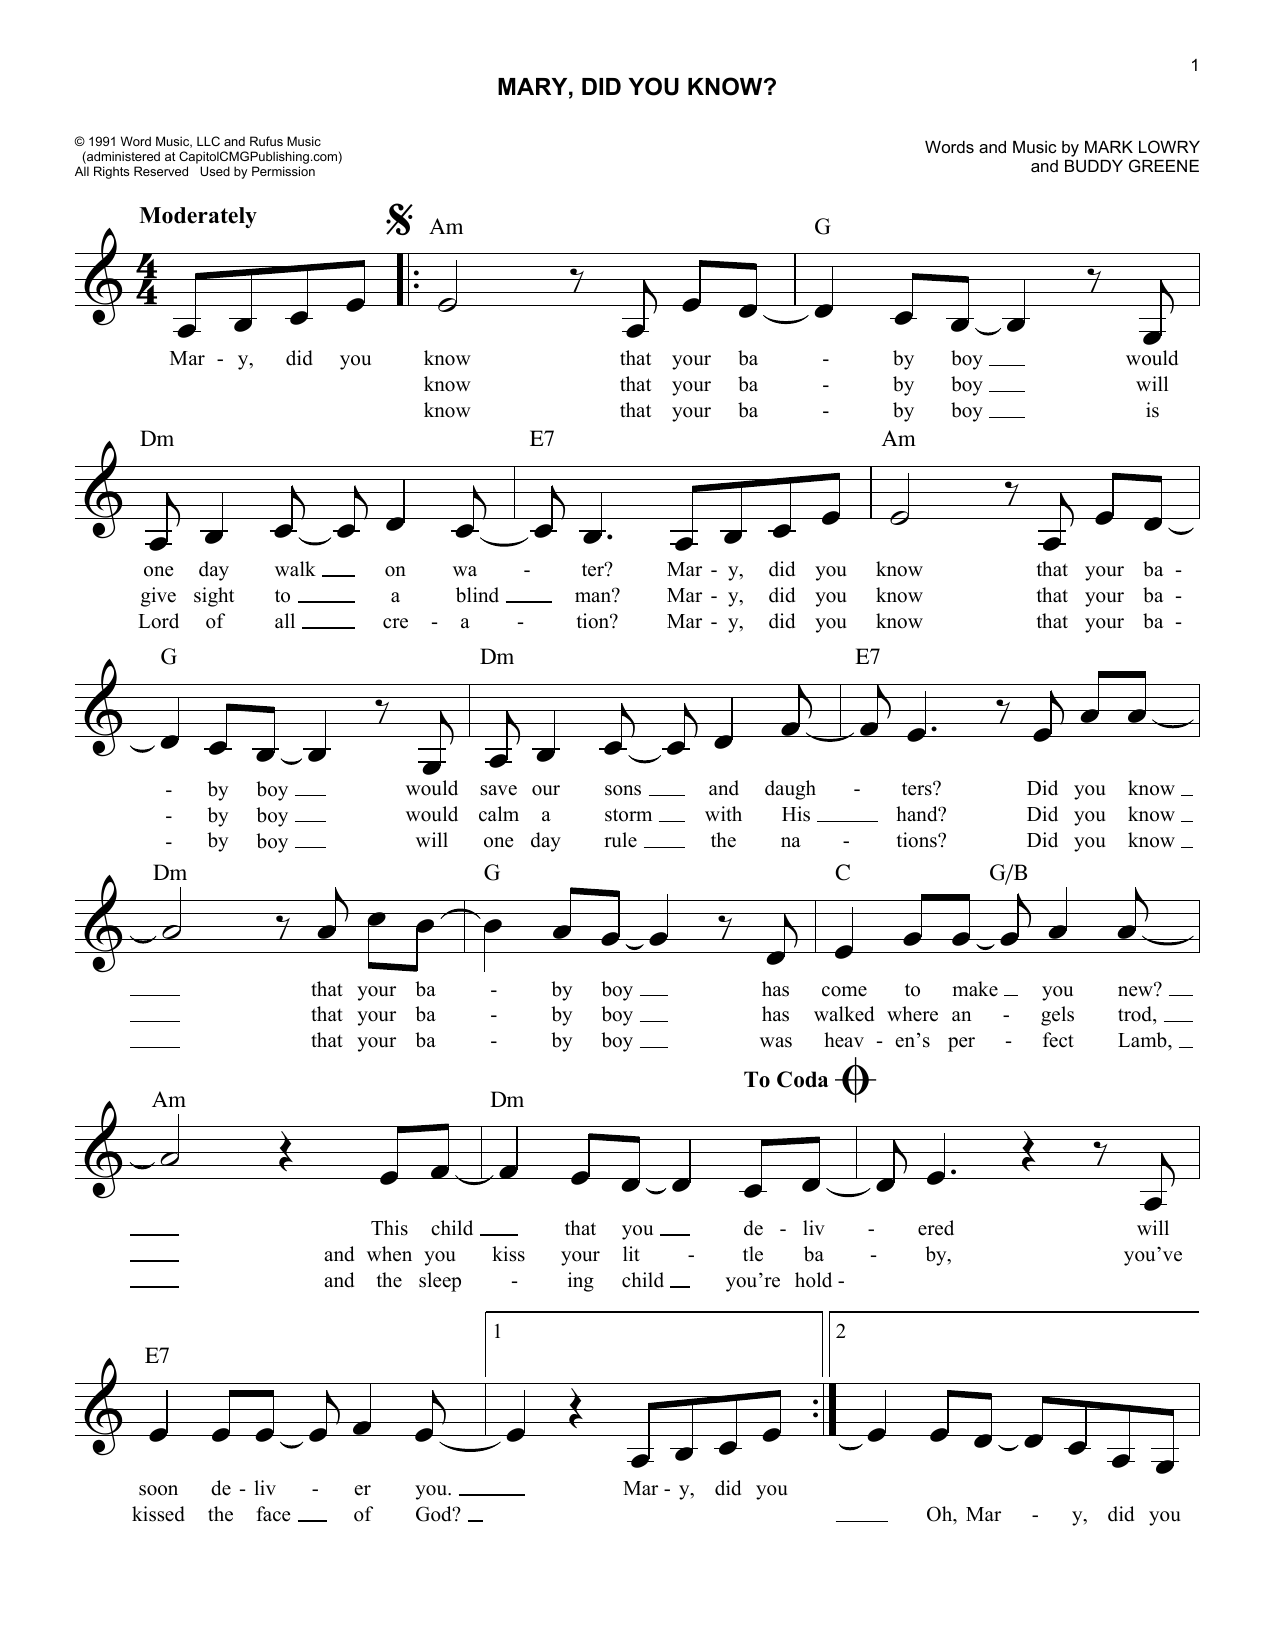 Kathy Mattea "Mary, Did You Know?" Sheet Music Notes, Chords